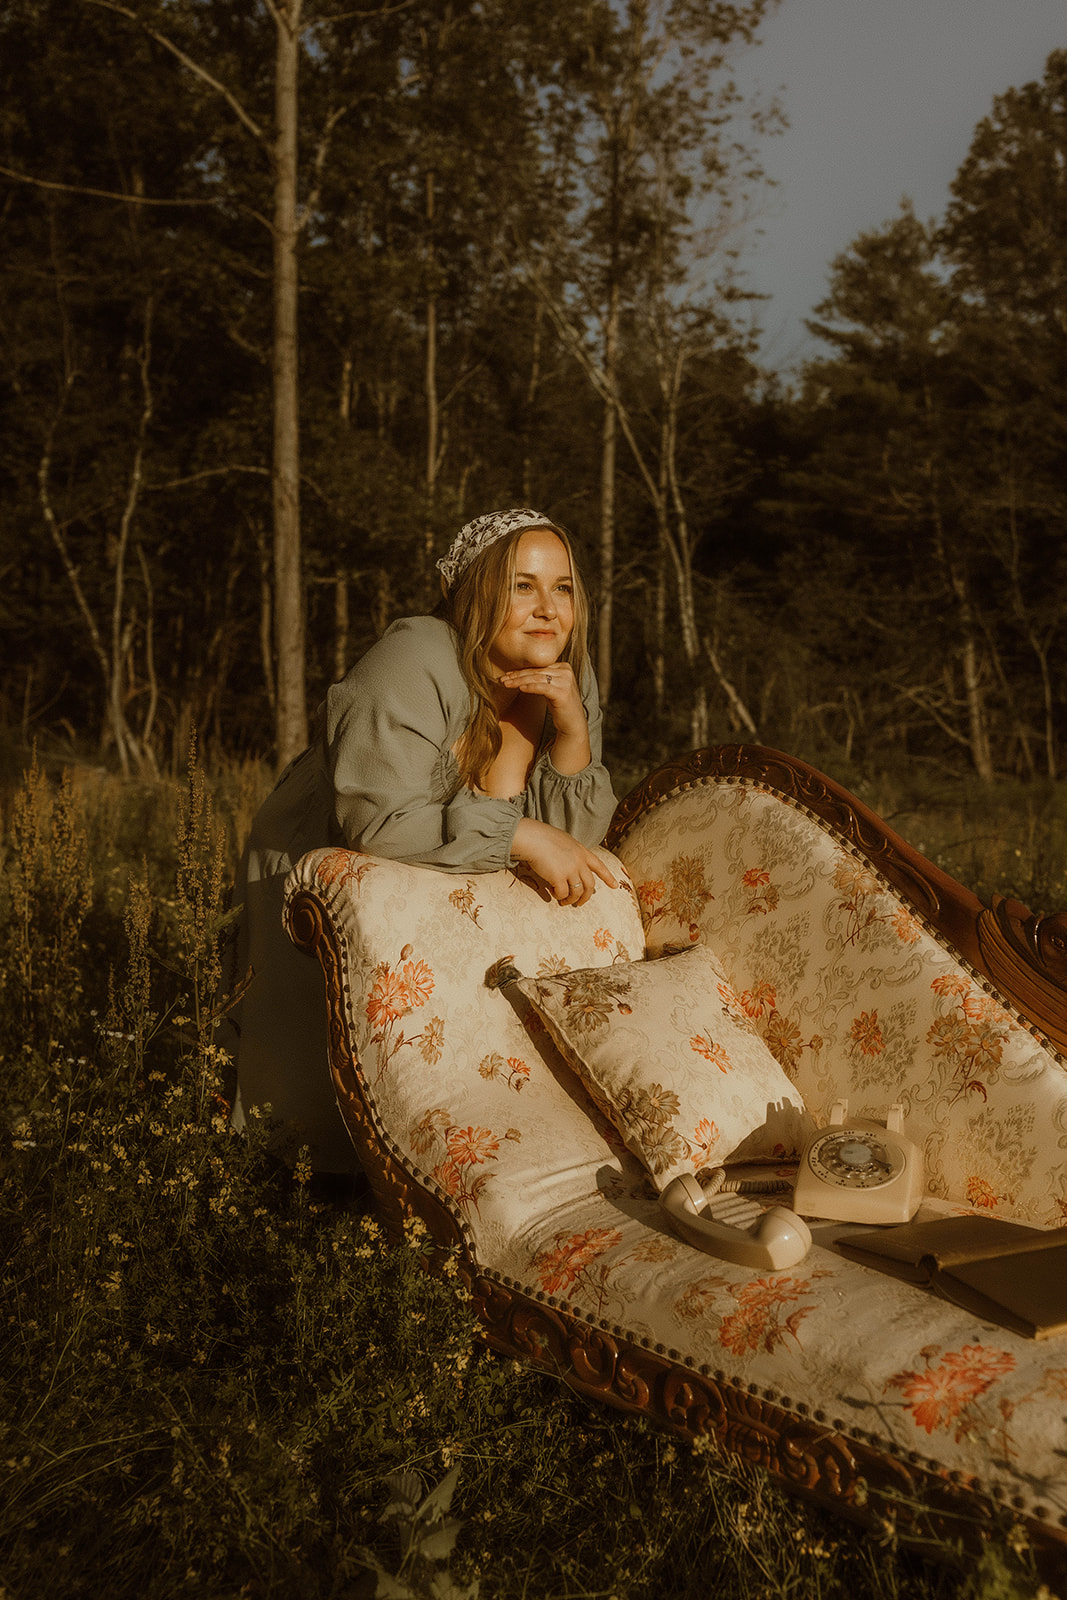 young girl poses with a vintage chaise for creative self portraits in a field